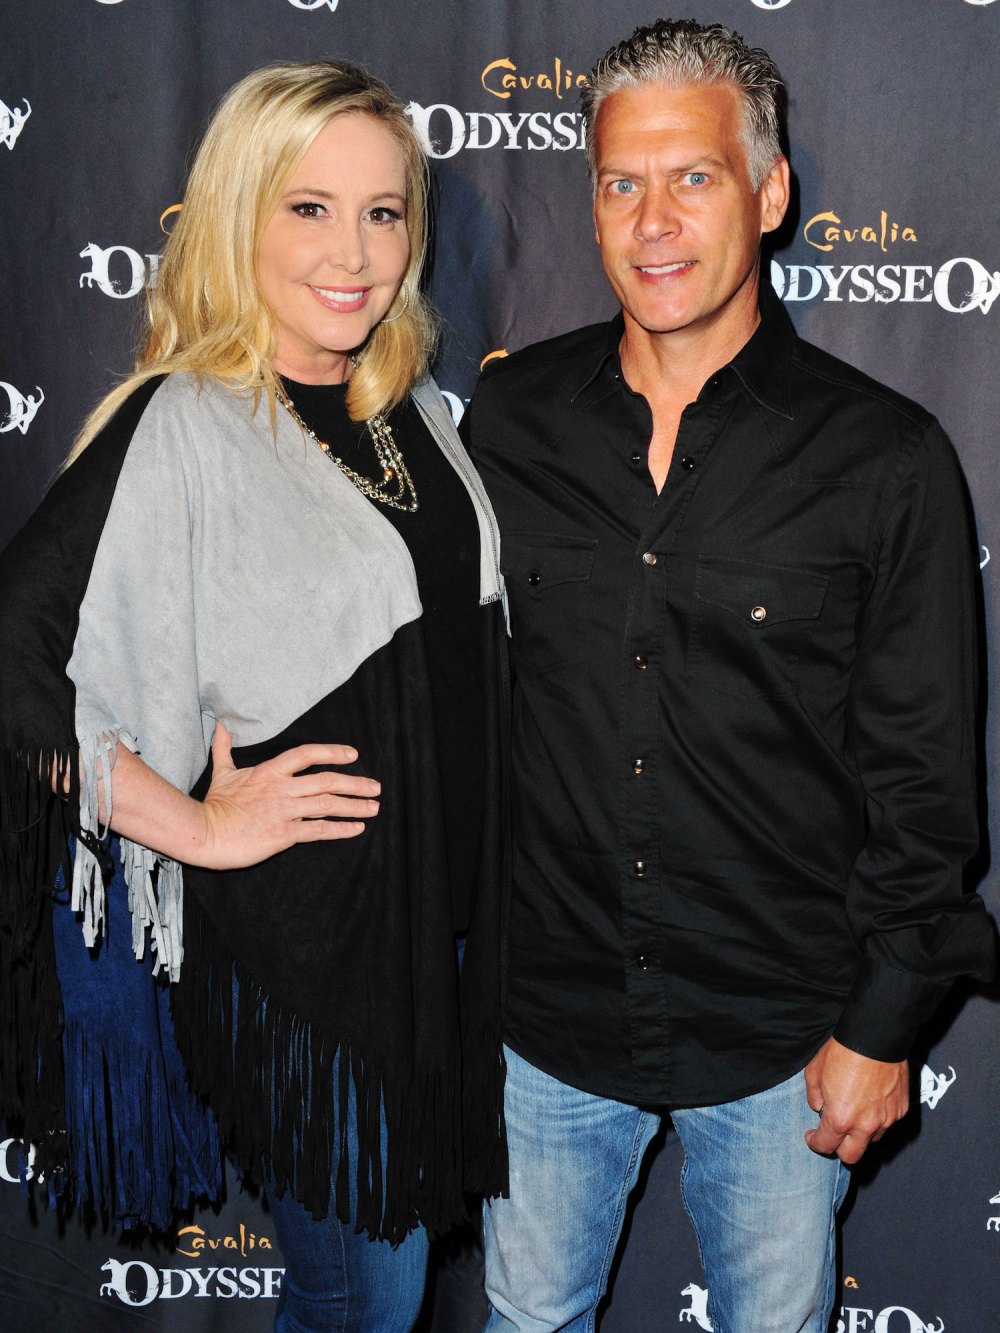 Shannon Beador will save her marriage to RHOC David Beador though